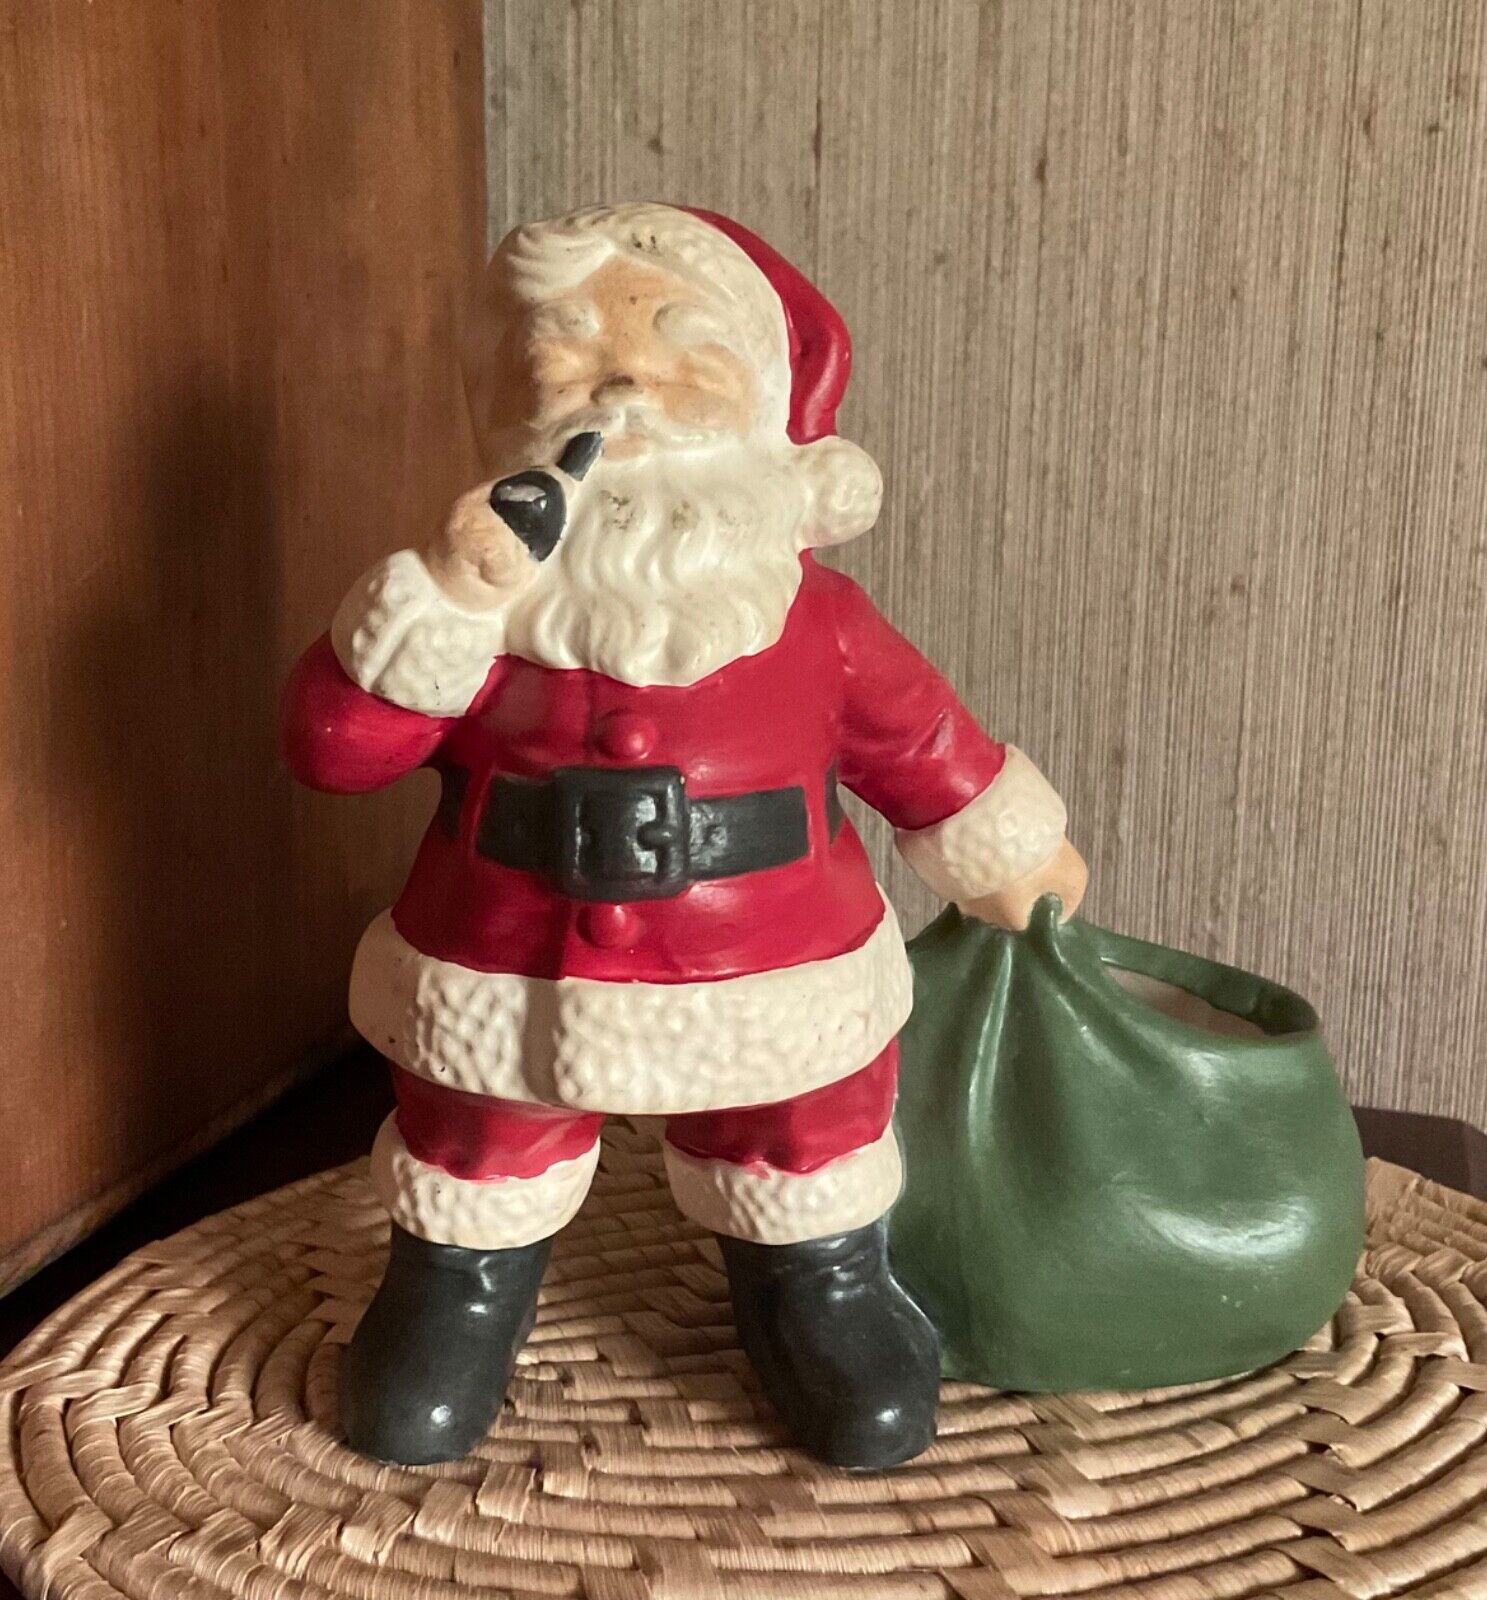 Vintage 1973 Holland Mold Ceramic Santa with Toy Bag and Pipe Figure Figurine